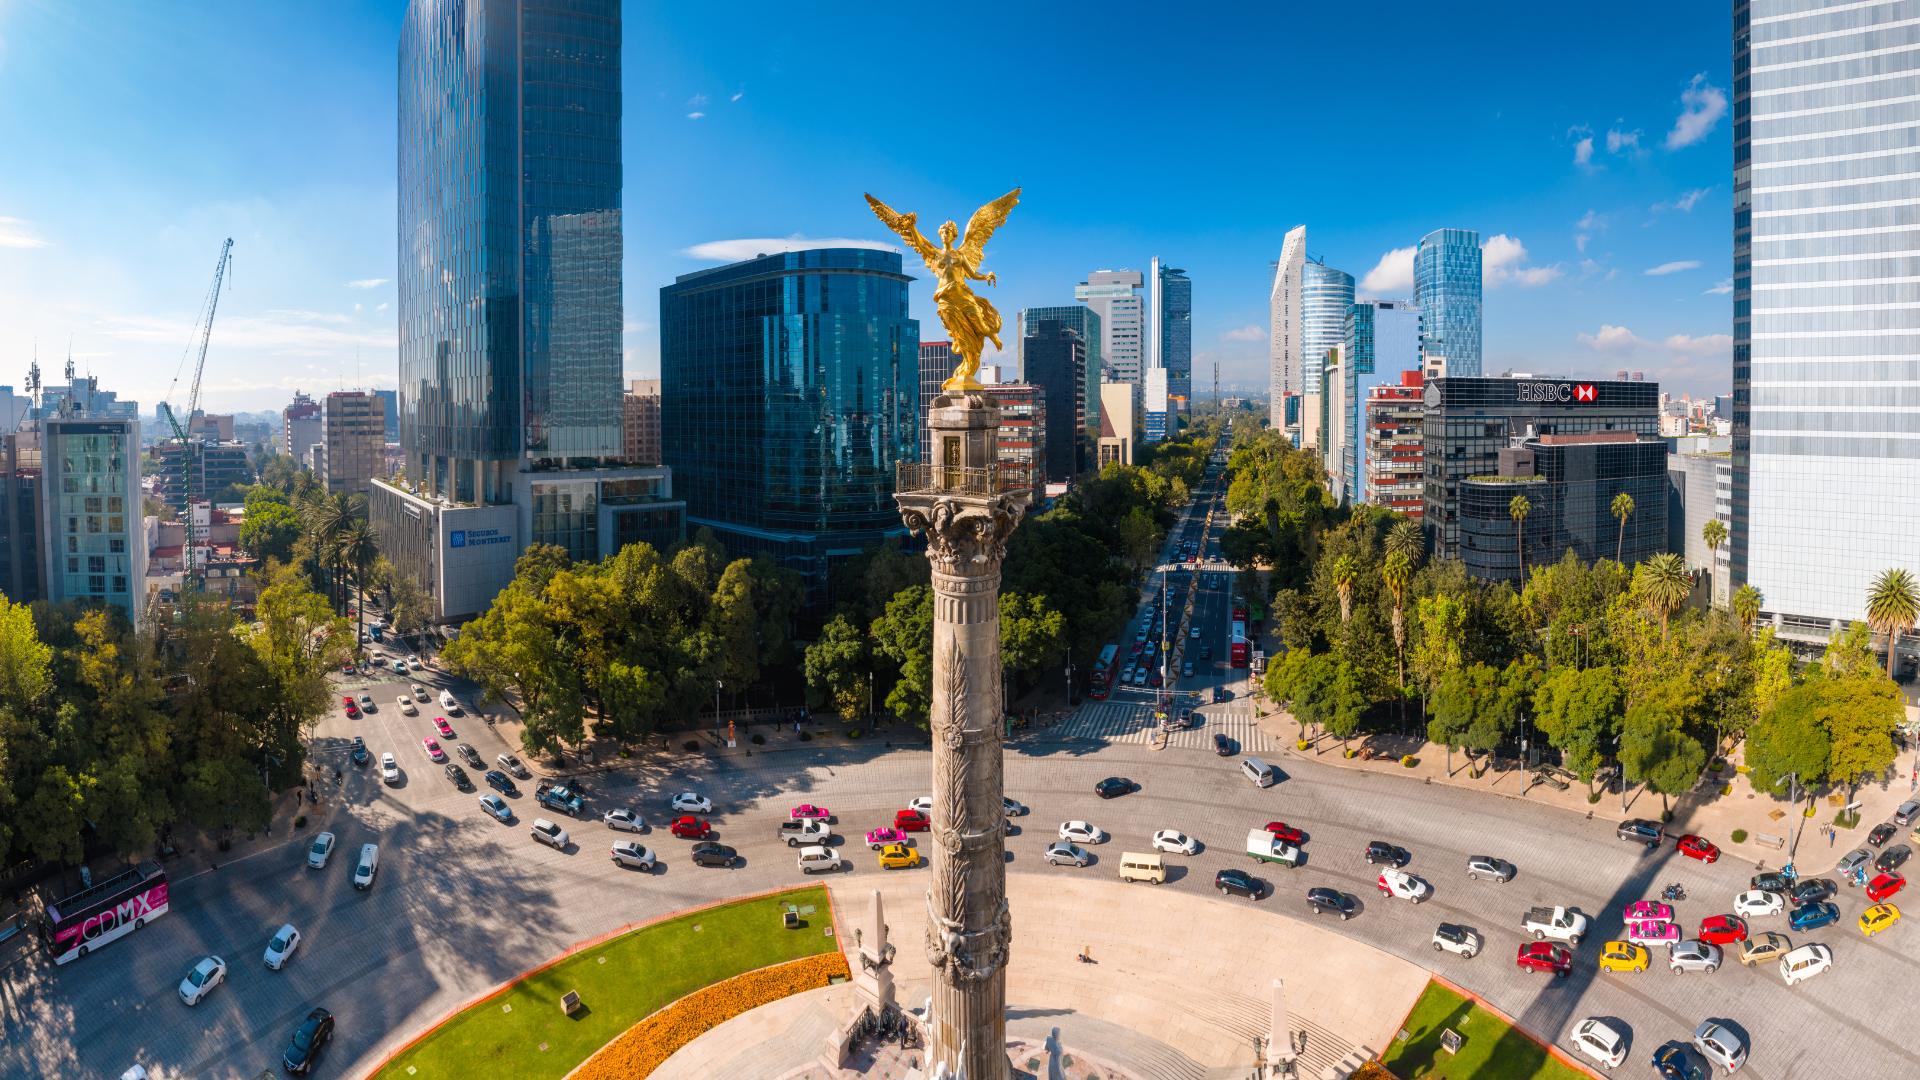 CDMX's independence monument